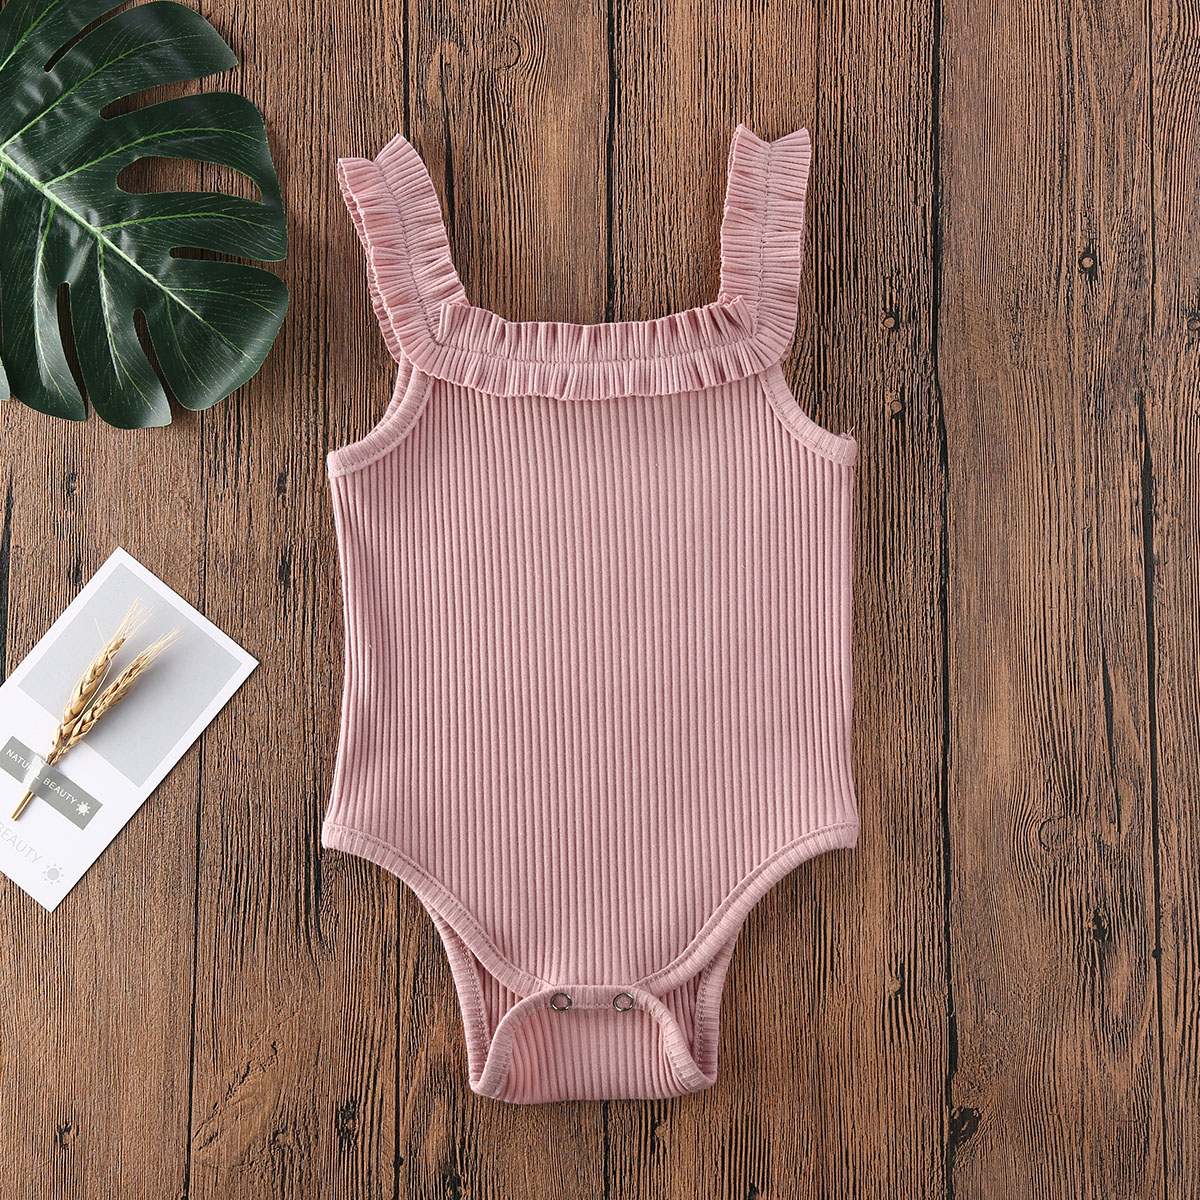 2020 Baby Girls Boys Bodysuits Summer Clothing Newbown Sleeveless Ribbed Ruffled Solid Jumpsuits Solid Playsuits 3M-24M